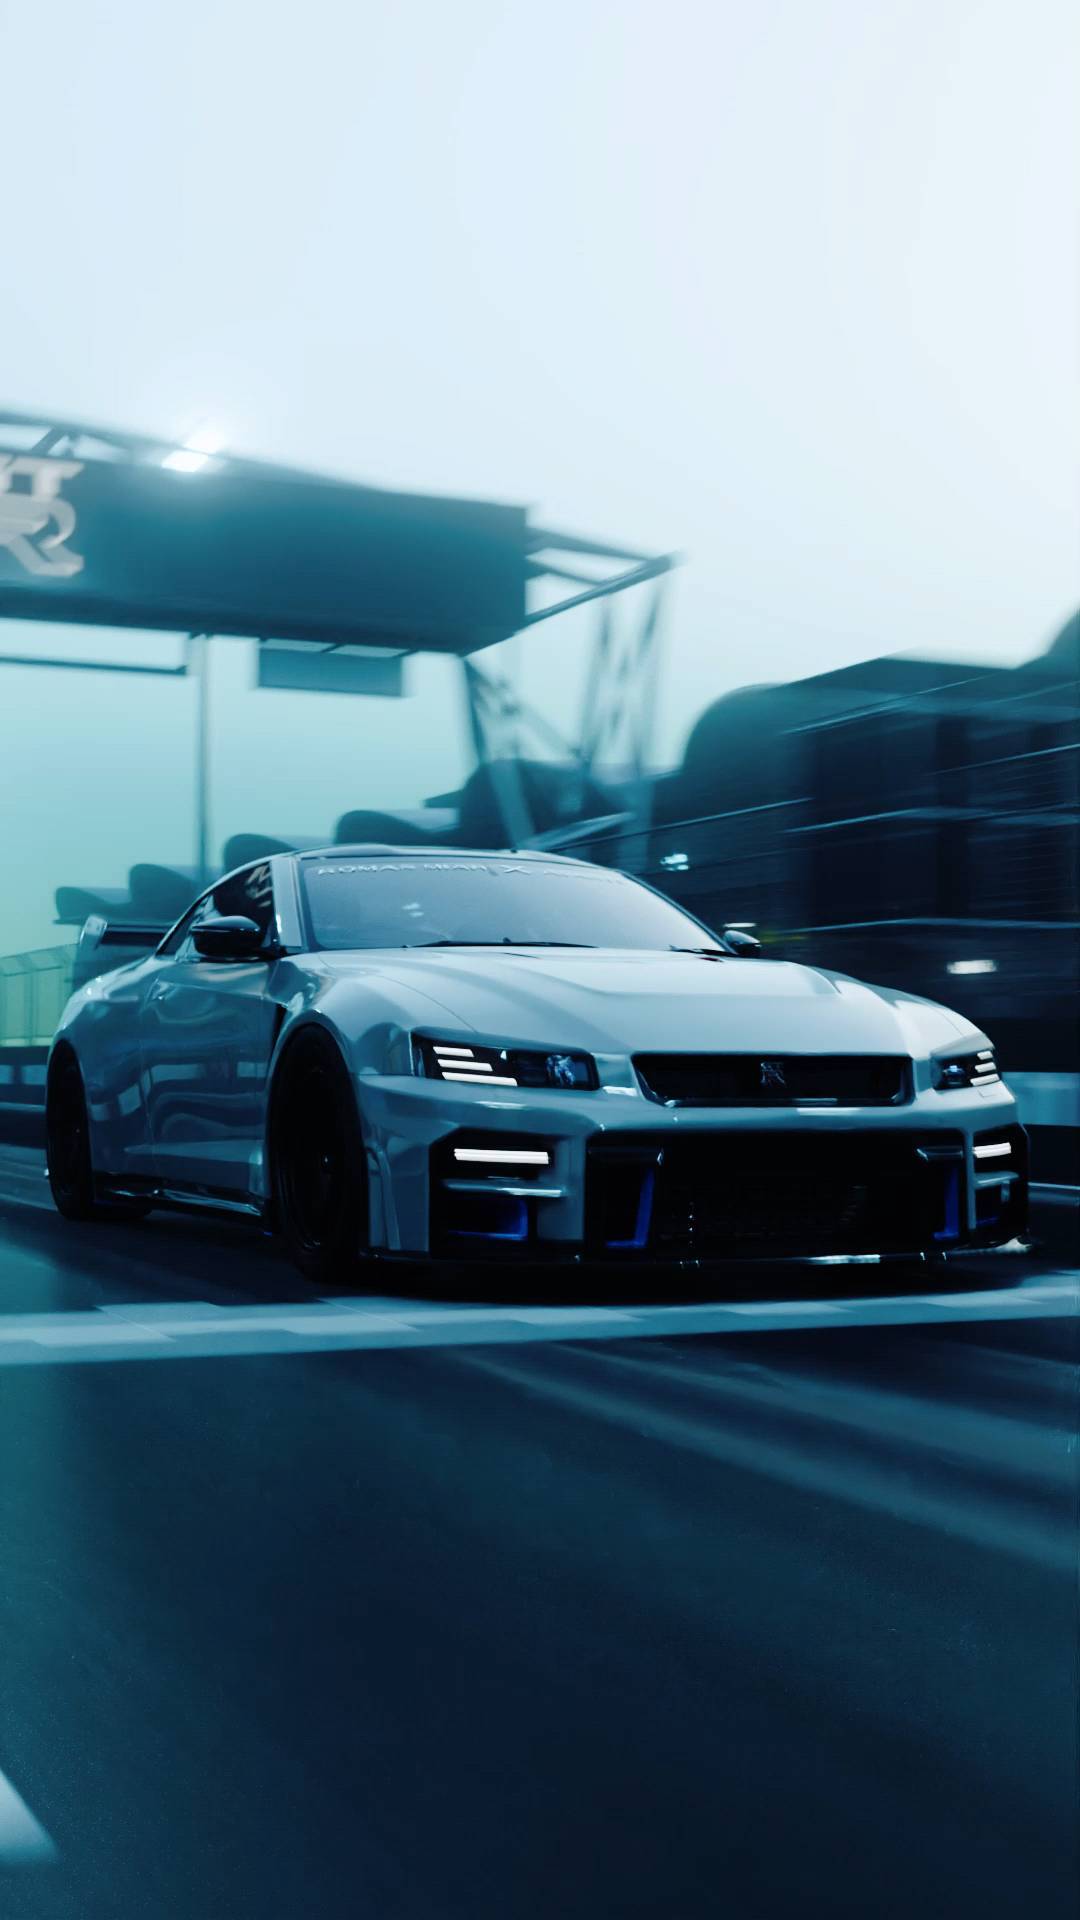 Iconic R34 Skyline GT-R Meets All-New R36 Nissan GT-R Heir - In a Dream -  autoevolution